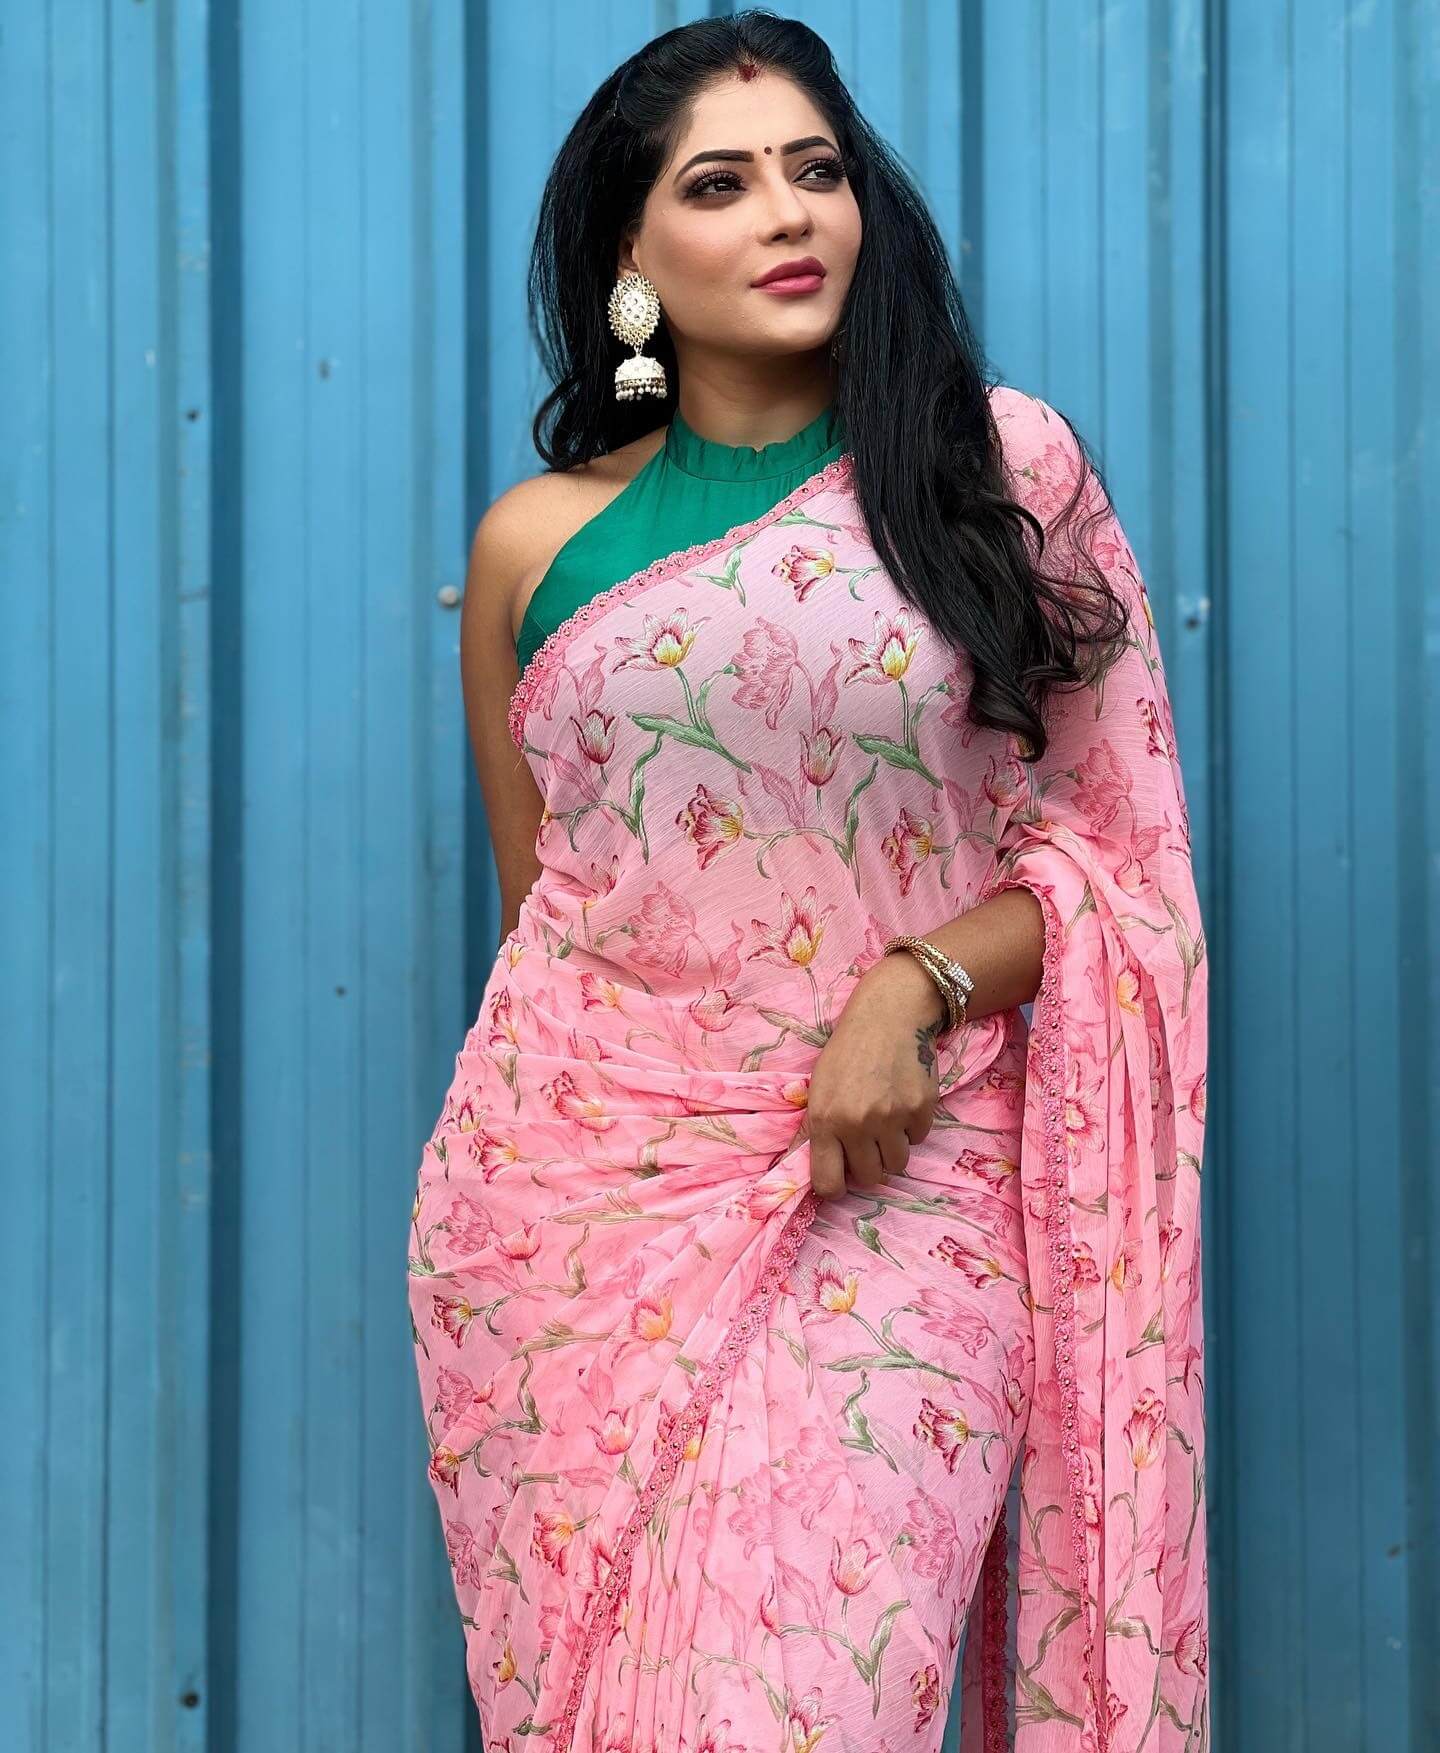 Reshma Pasupuleti In Bubblegum Pink Floral Printed Crepe Saree With Green Halter Neck Blouse - Ethnical Saree Outfits & Looks